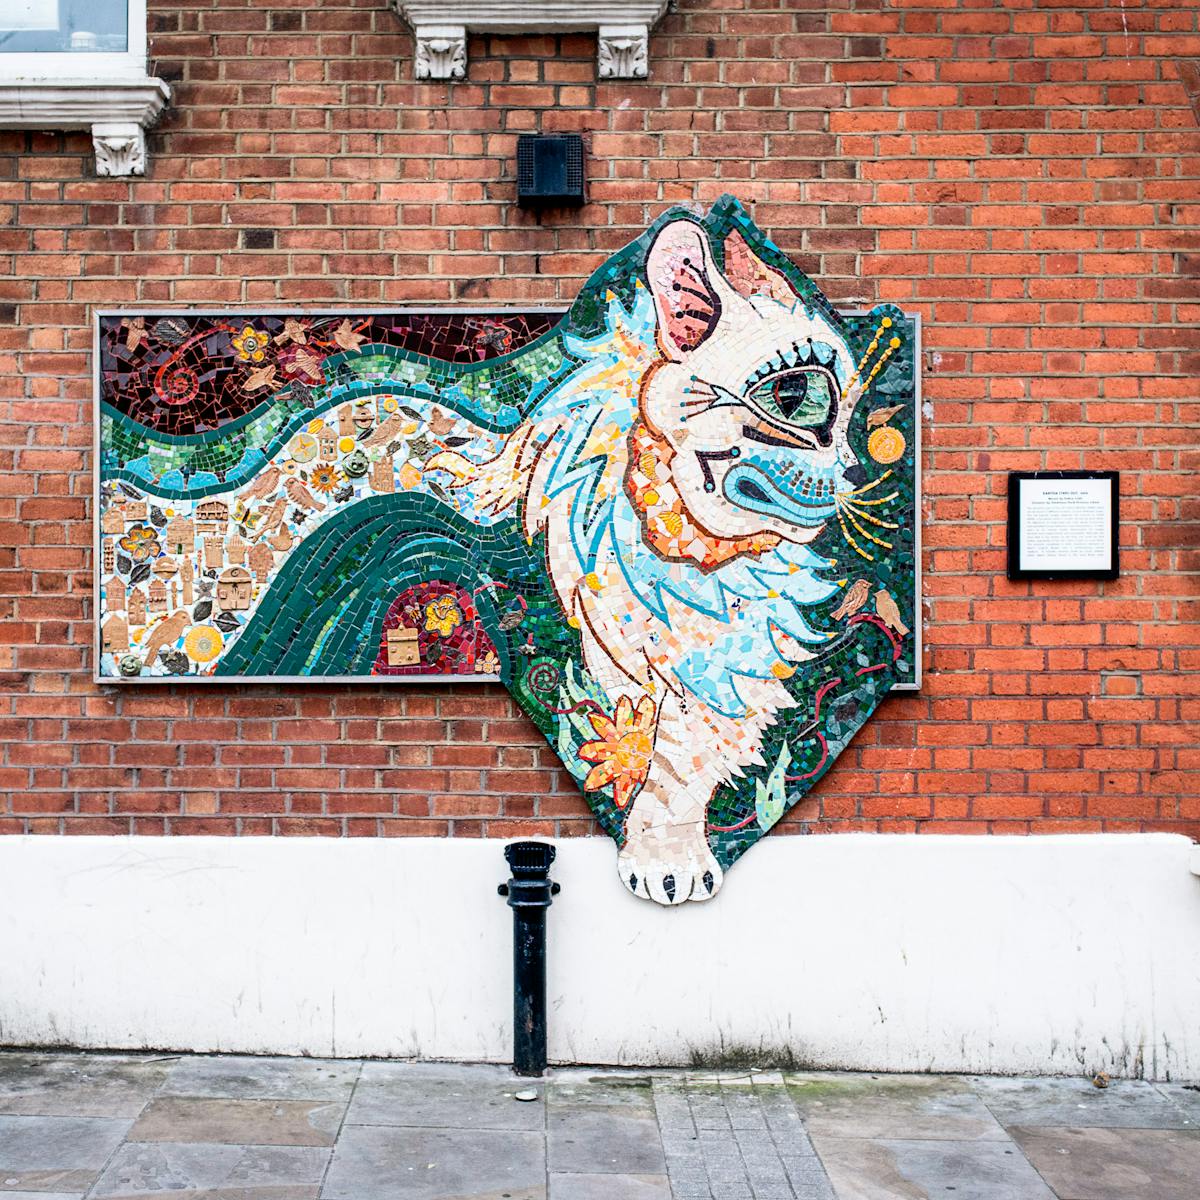 Photograph showing a brightly coloured abstract ceramic mosaic of a cat, in the style of Louis Wain. The mosaic is hung on the red brick wall of the outside of a property. Below the mosaic is the pavement and elements of street furniture. To either side are parts of window and an information plaque. 